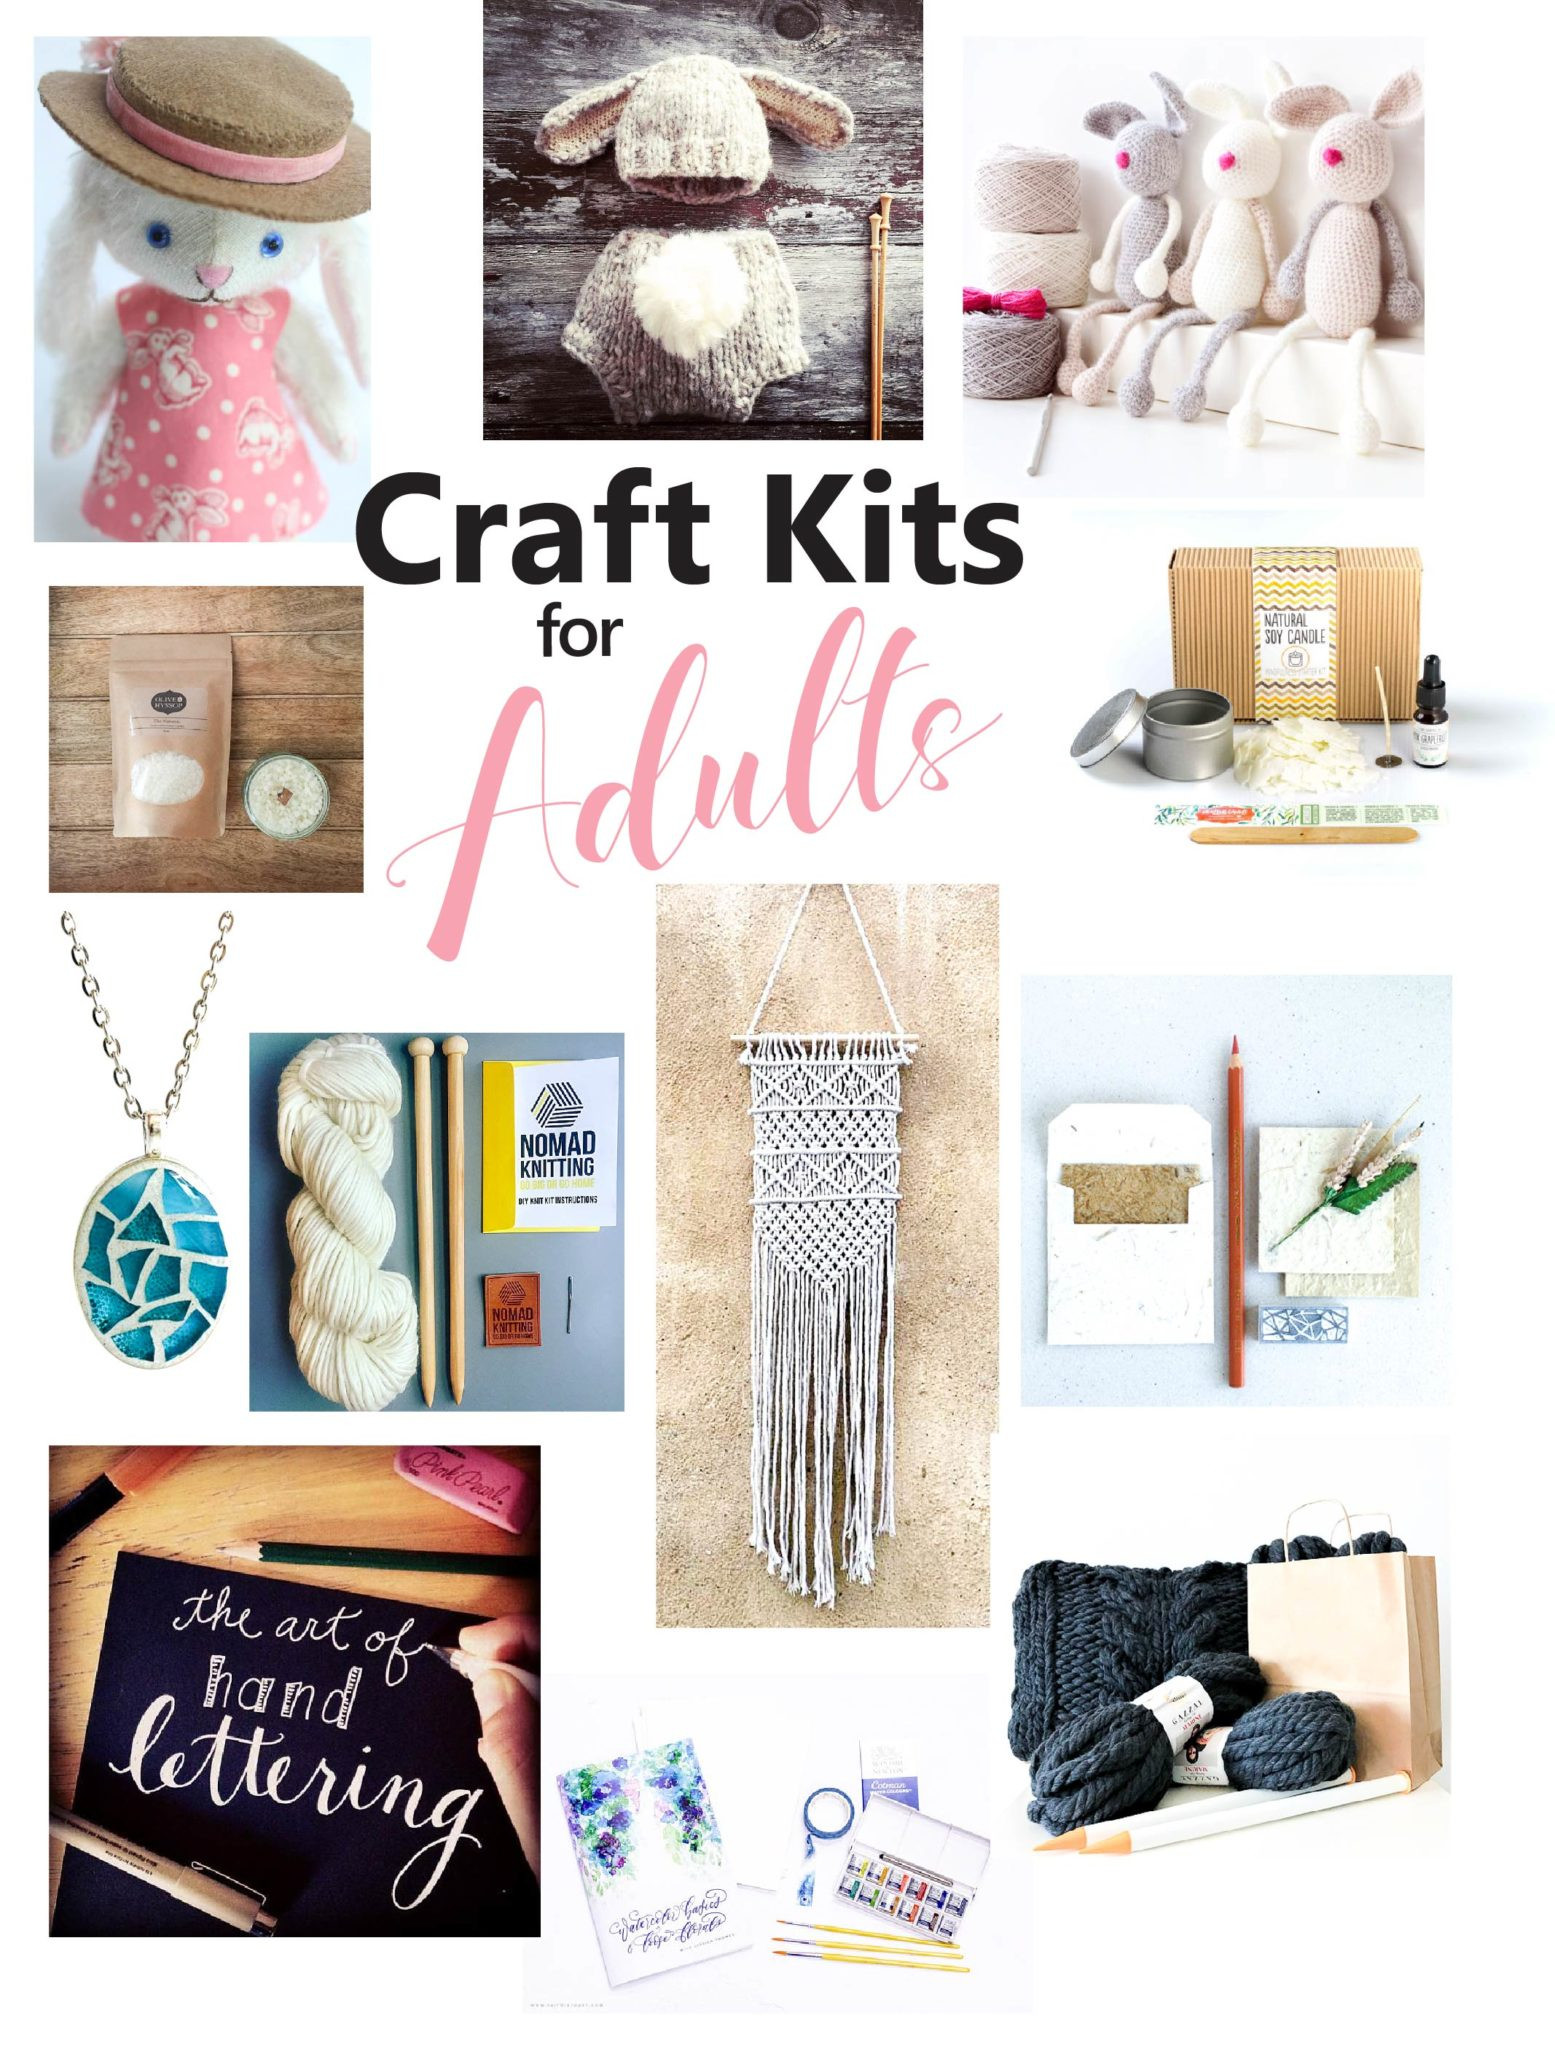 Best Craft Kits For Adults
 The Best Craft Kits for Adults – Sustain My Craft Habit